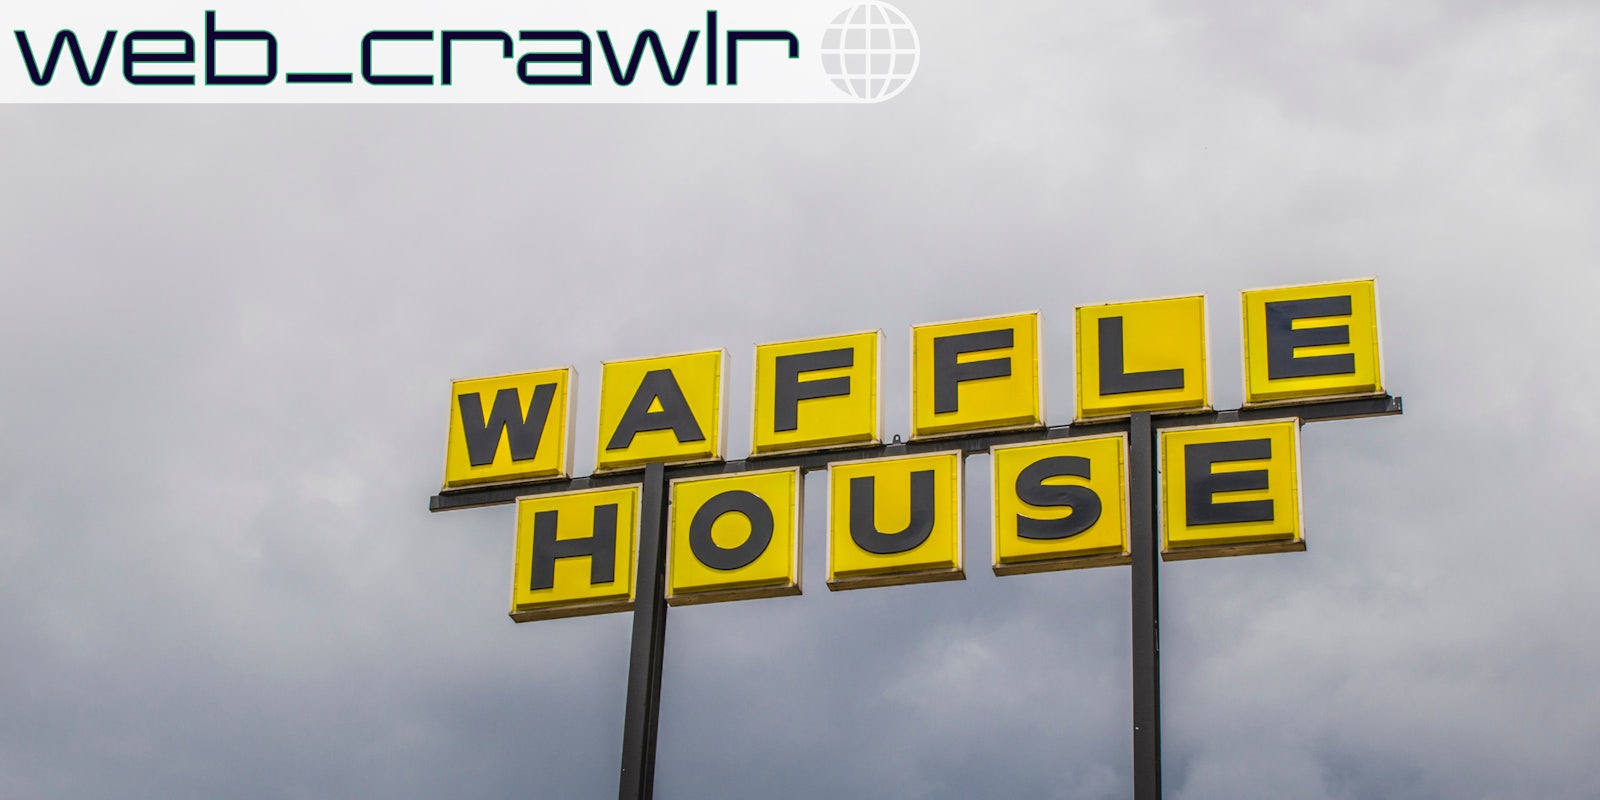 A Waffle House sign with clouds behind it. The Daily Dot newsletter web_crawlr logo is in the top left corner.